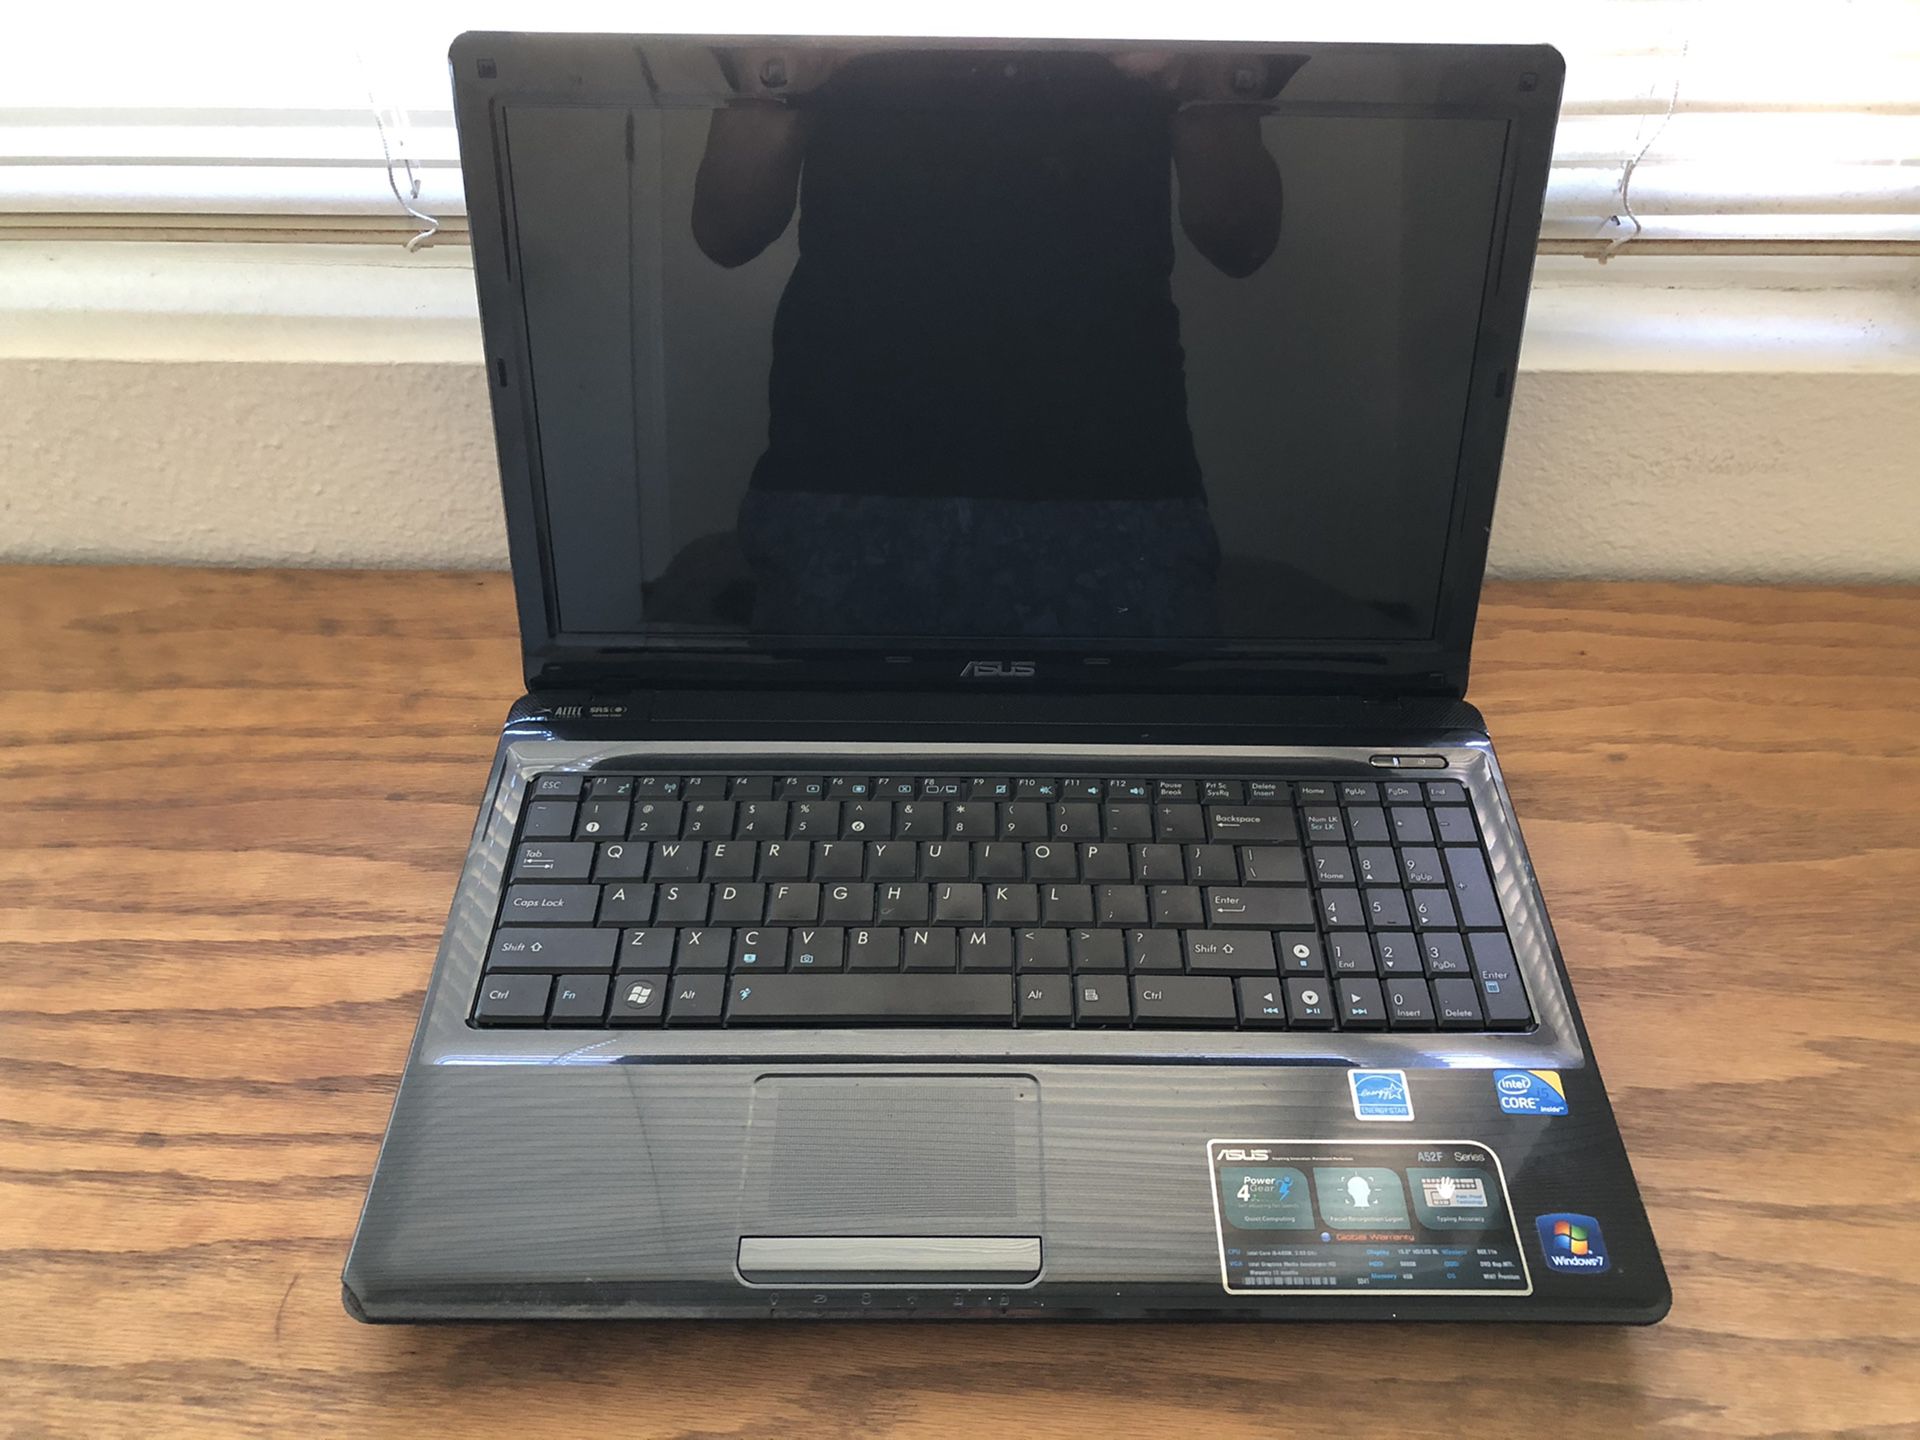 ASUS Laptop- Barely Used- Like New